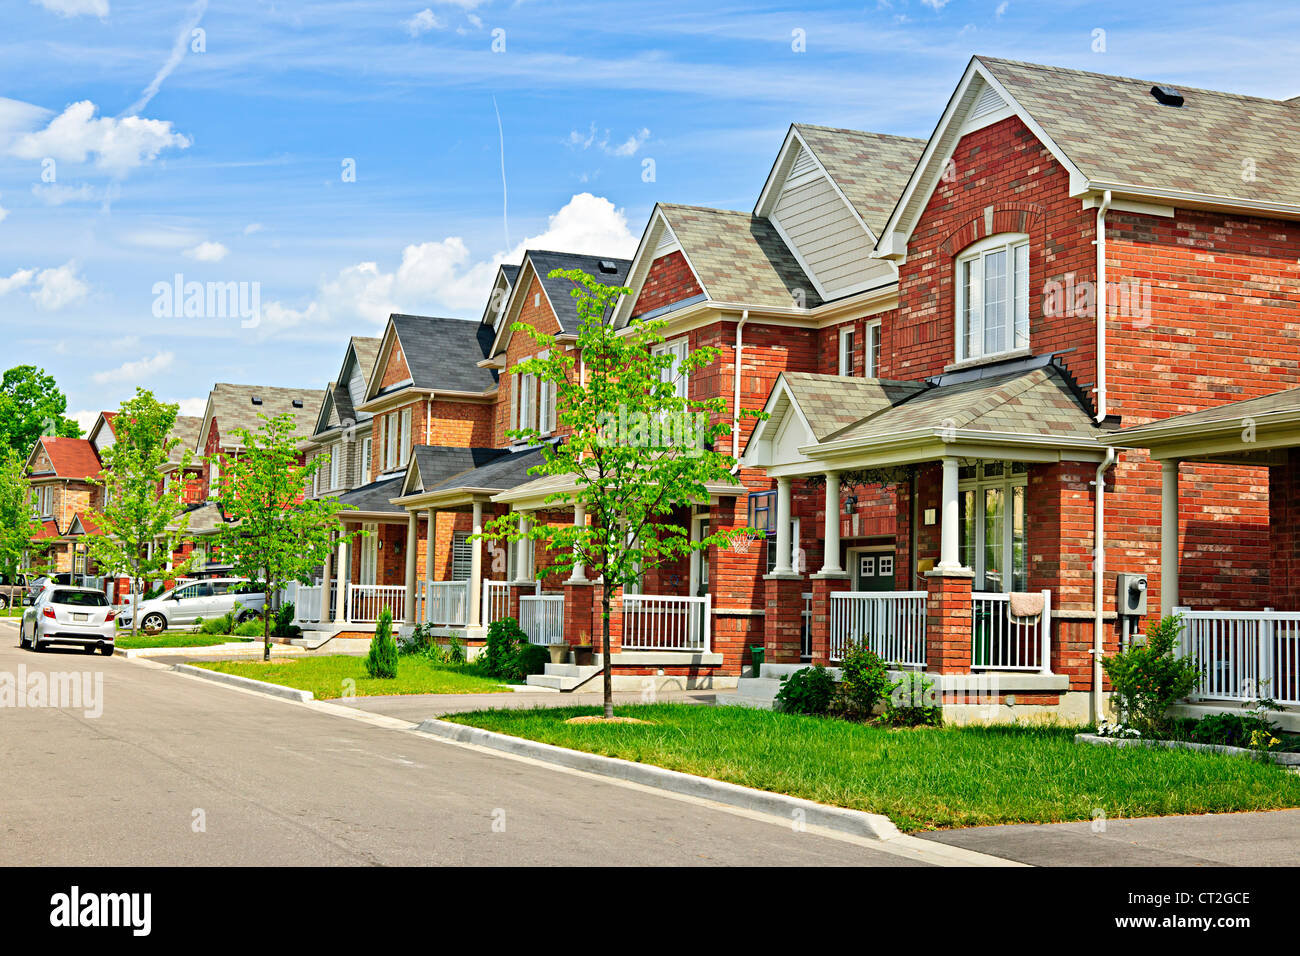 Suburban residential street with red brick houses Stock Photo